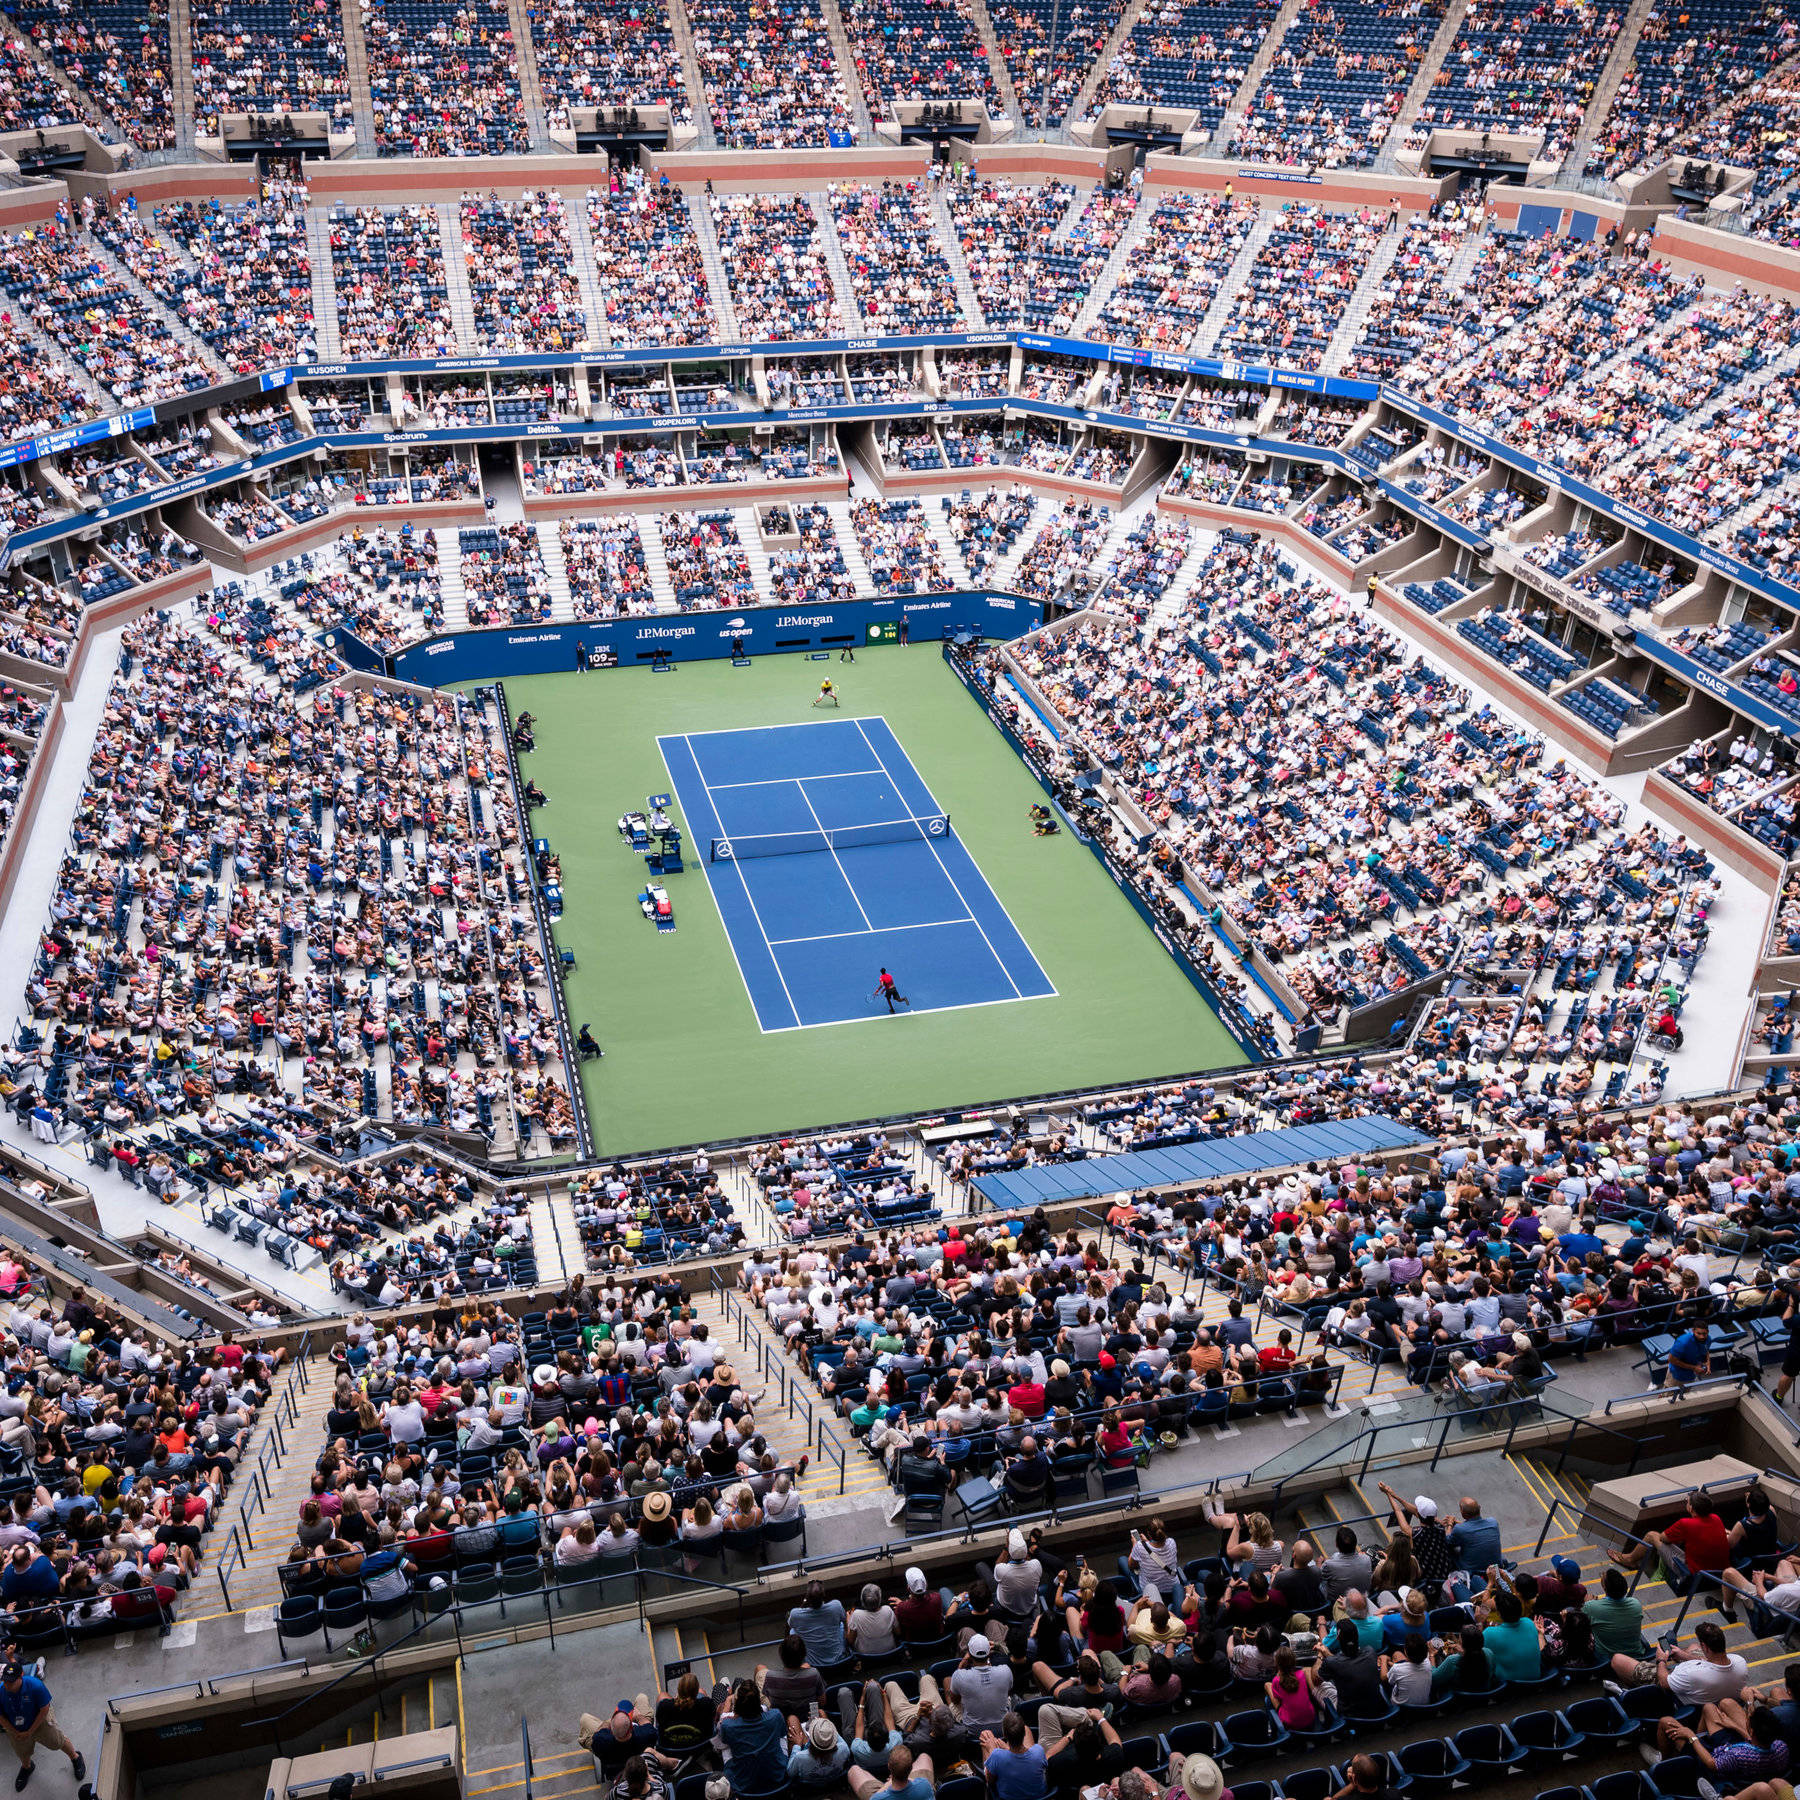 Us Open Stadium With Audience Background